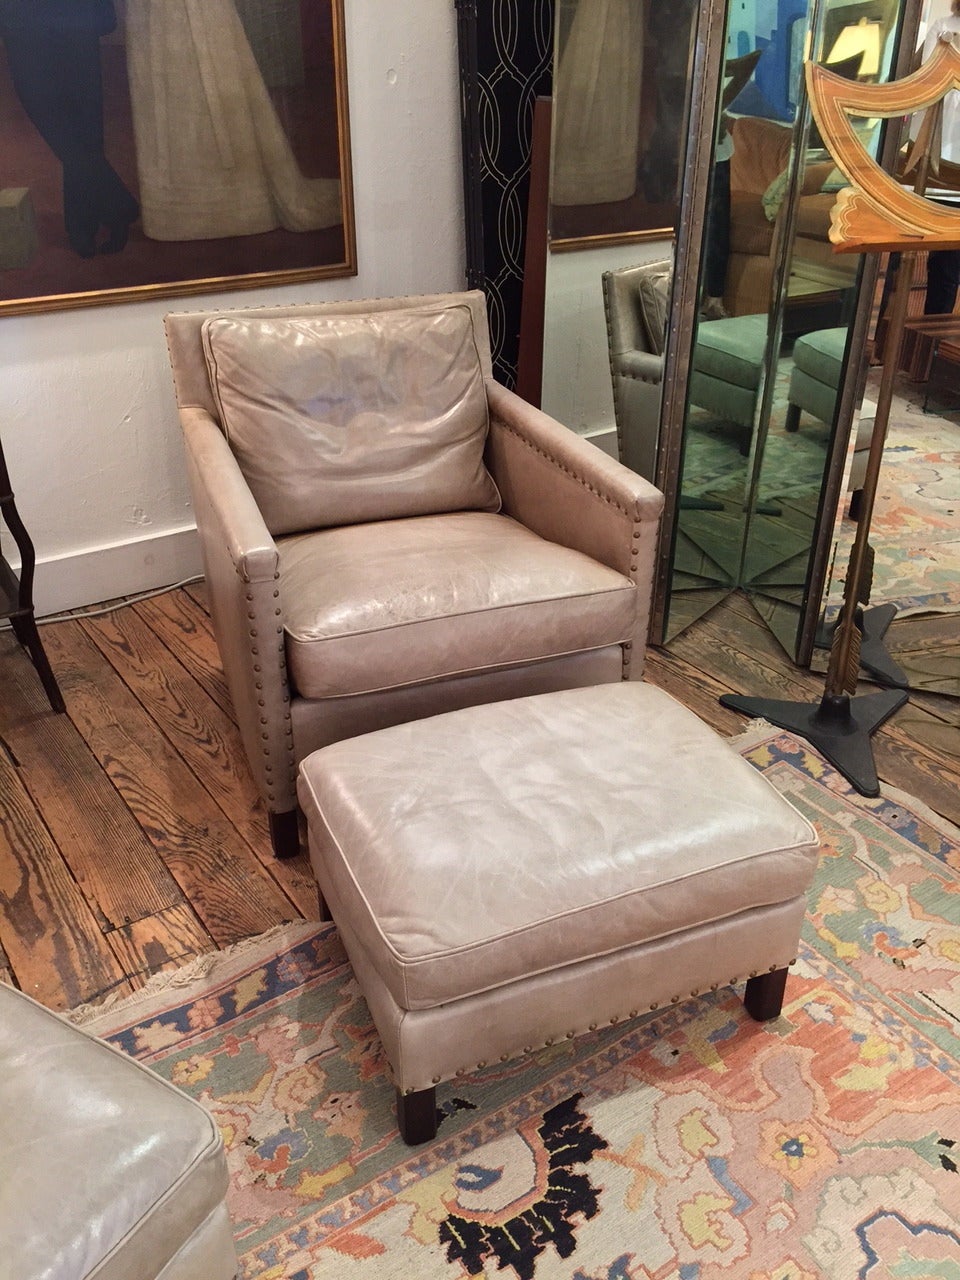 Two very good soft leather club chairs and ottomans in a neutral very pale celery green with brass nailheads and ottomans to match.  Labels say ABC Carpet.
Seat H 18